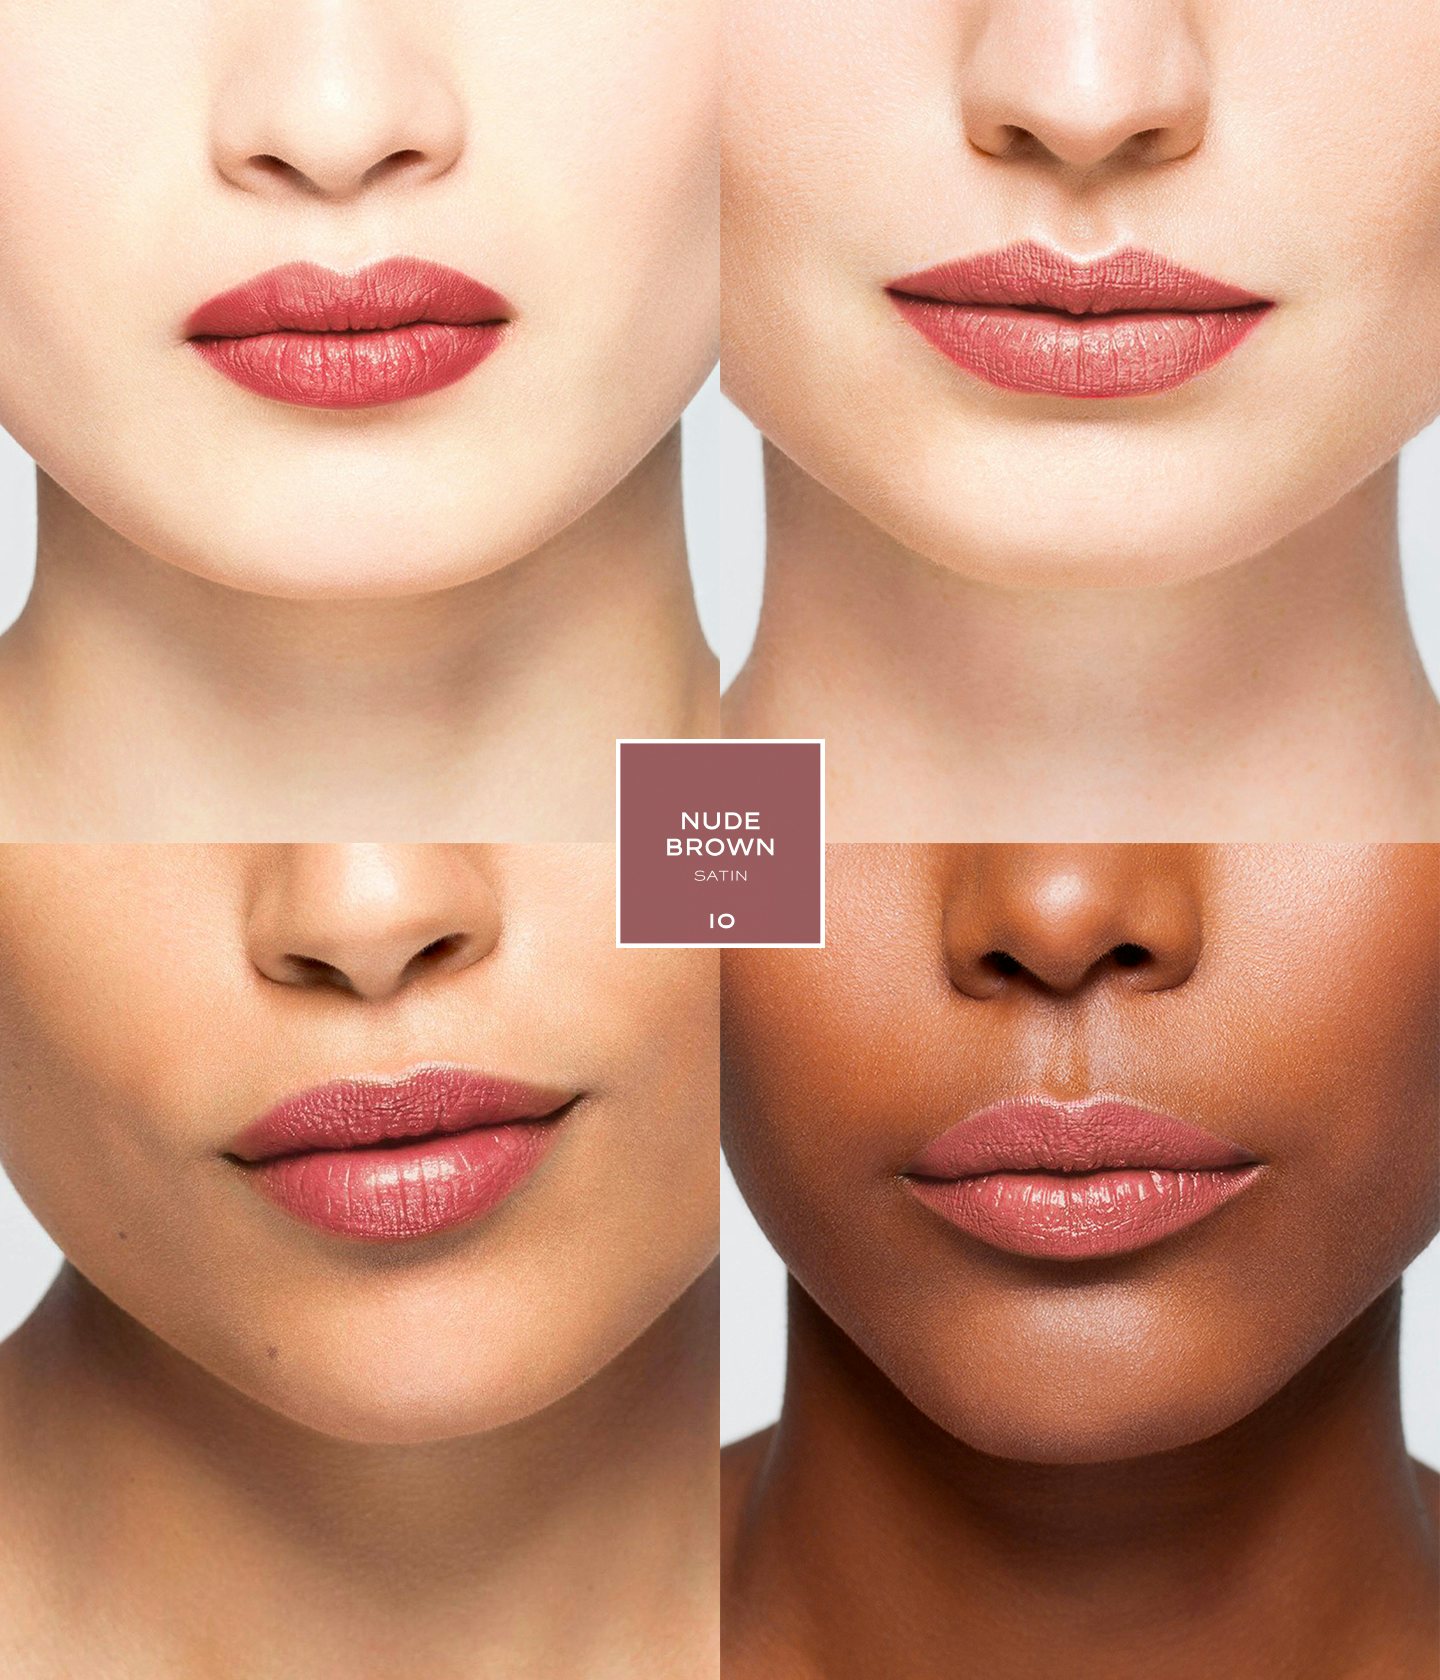 La bouche rouge Nude Brown lipstick in the lips of the models 